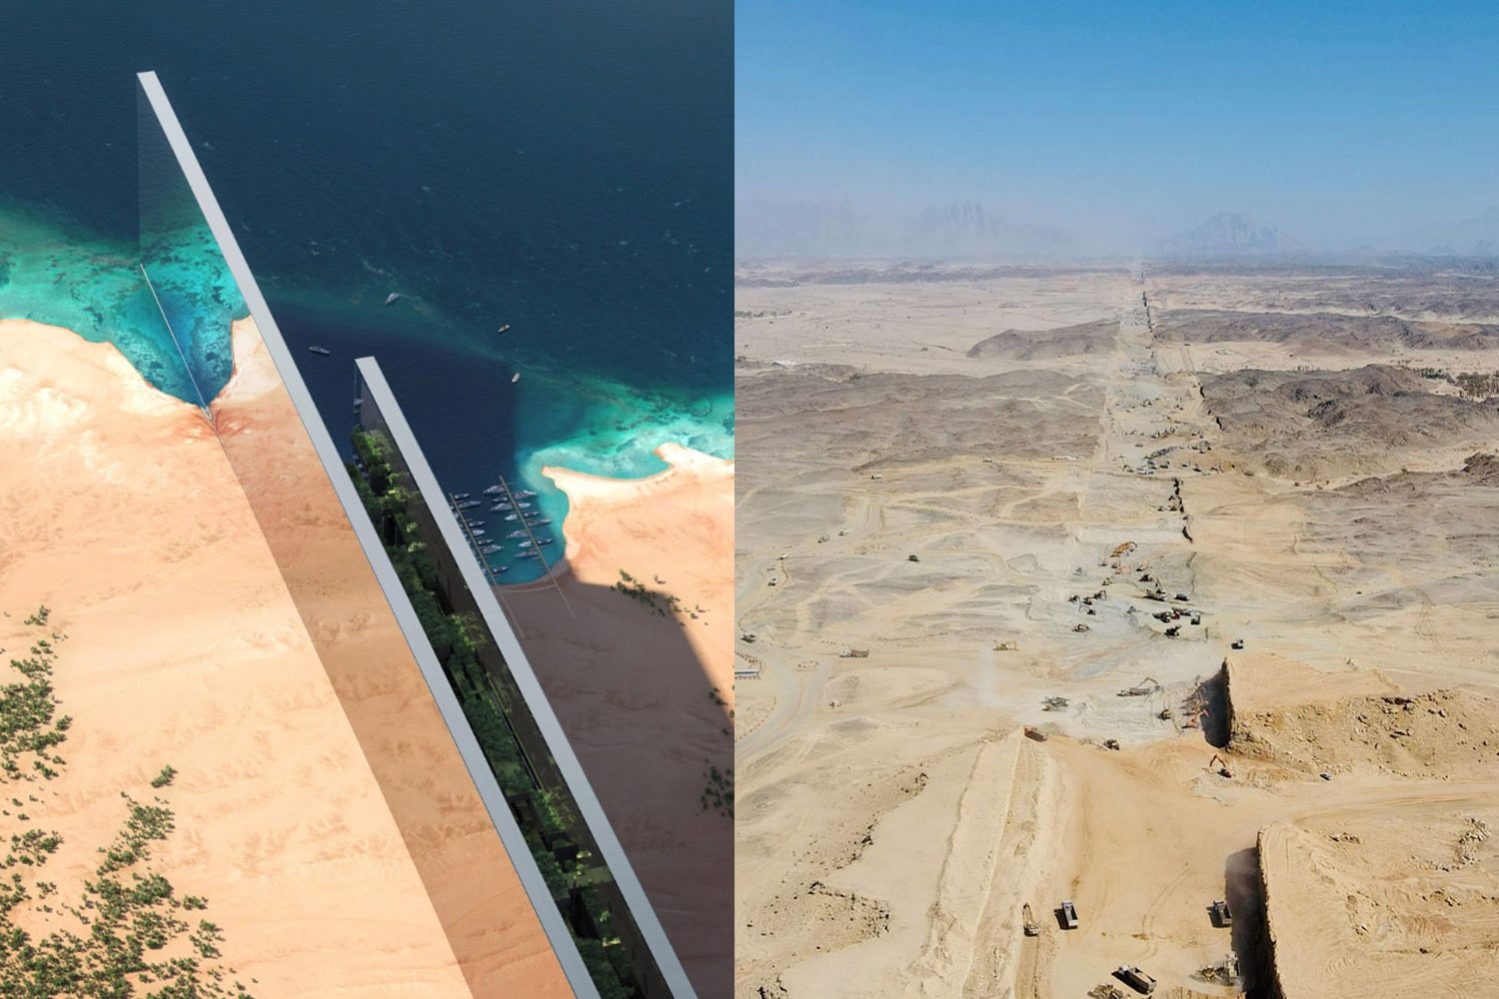 OT Sky released photos of NEOM's The Line project construction